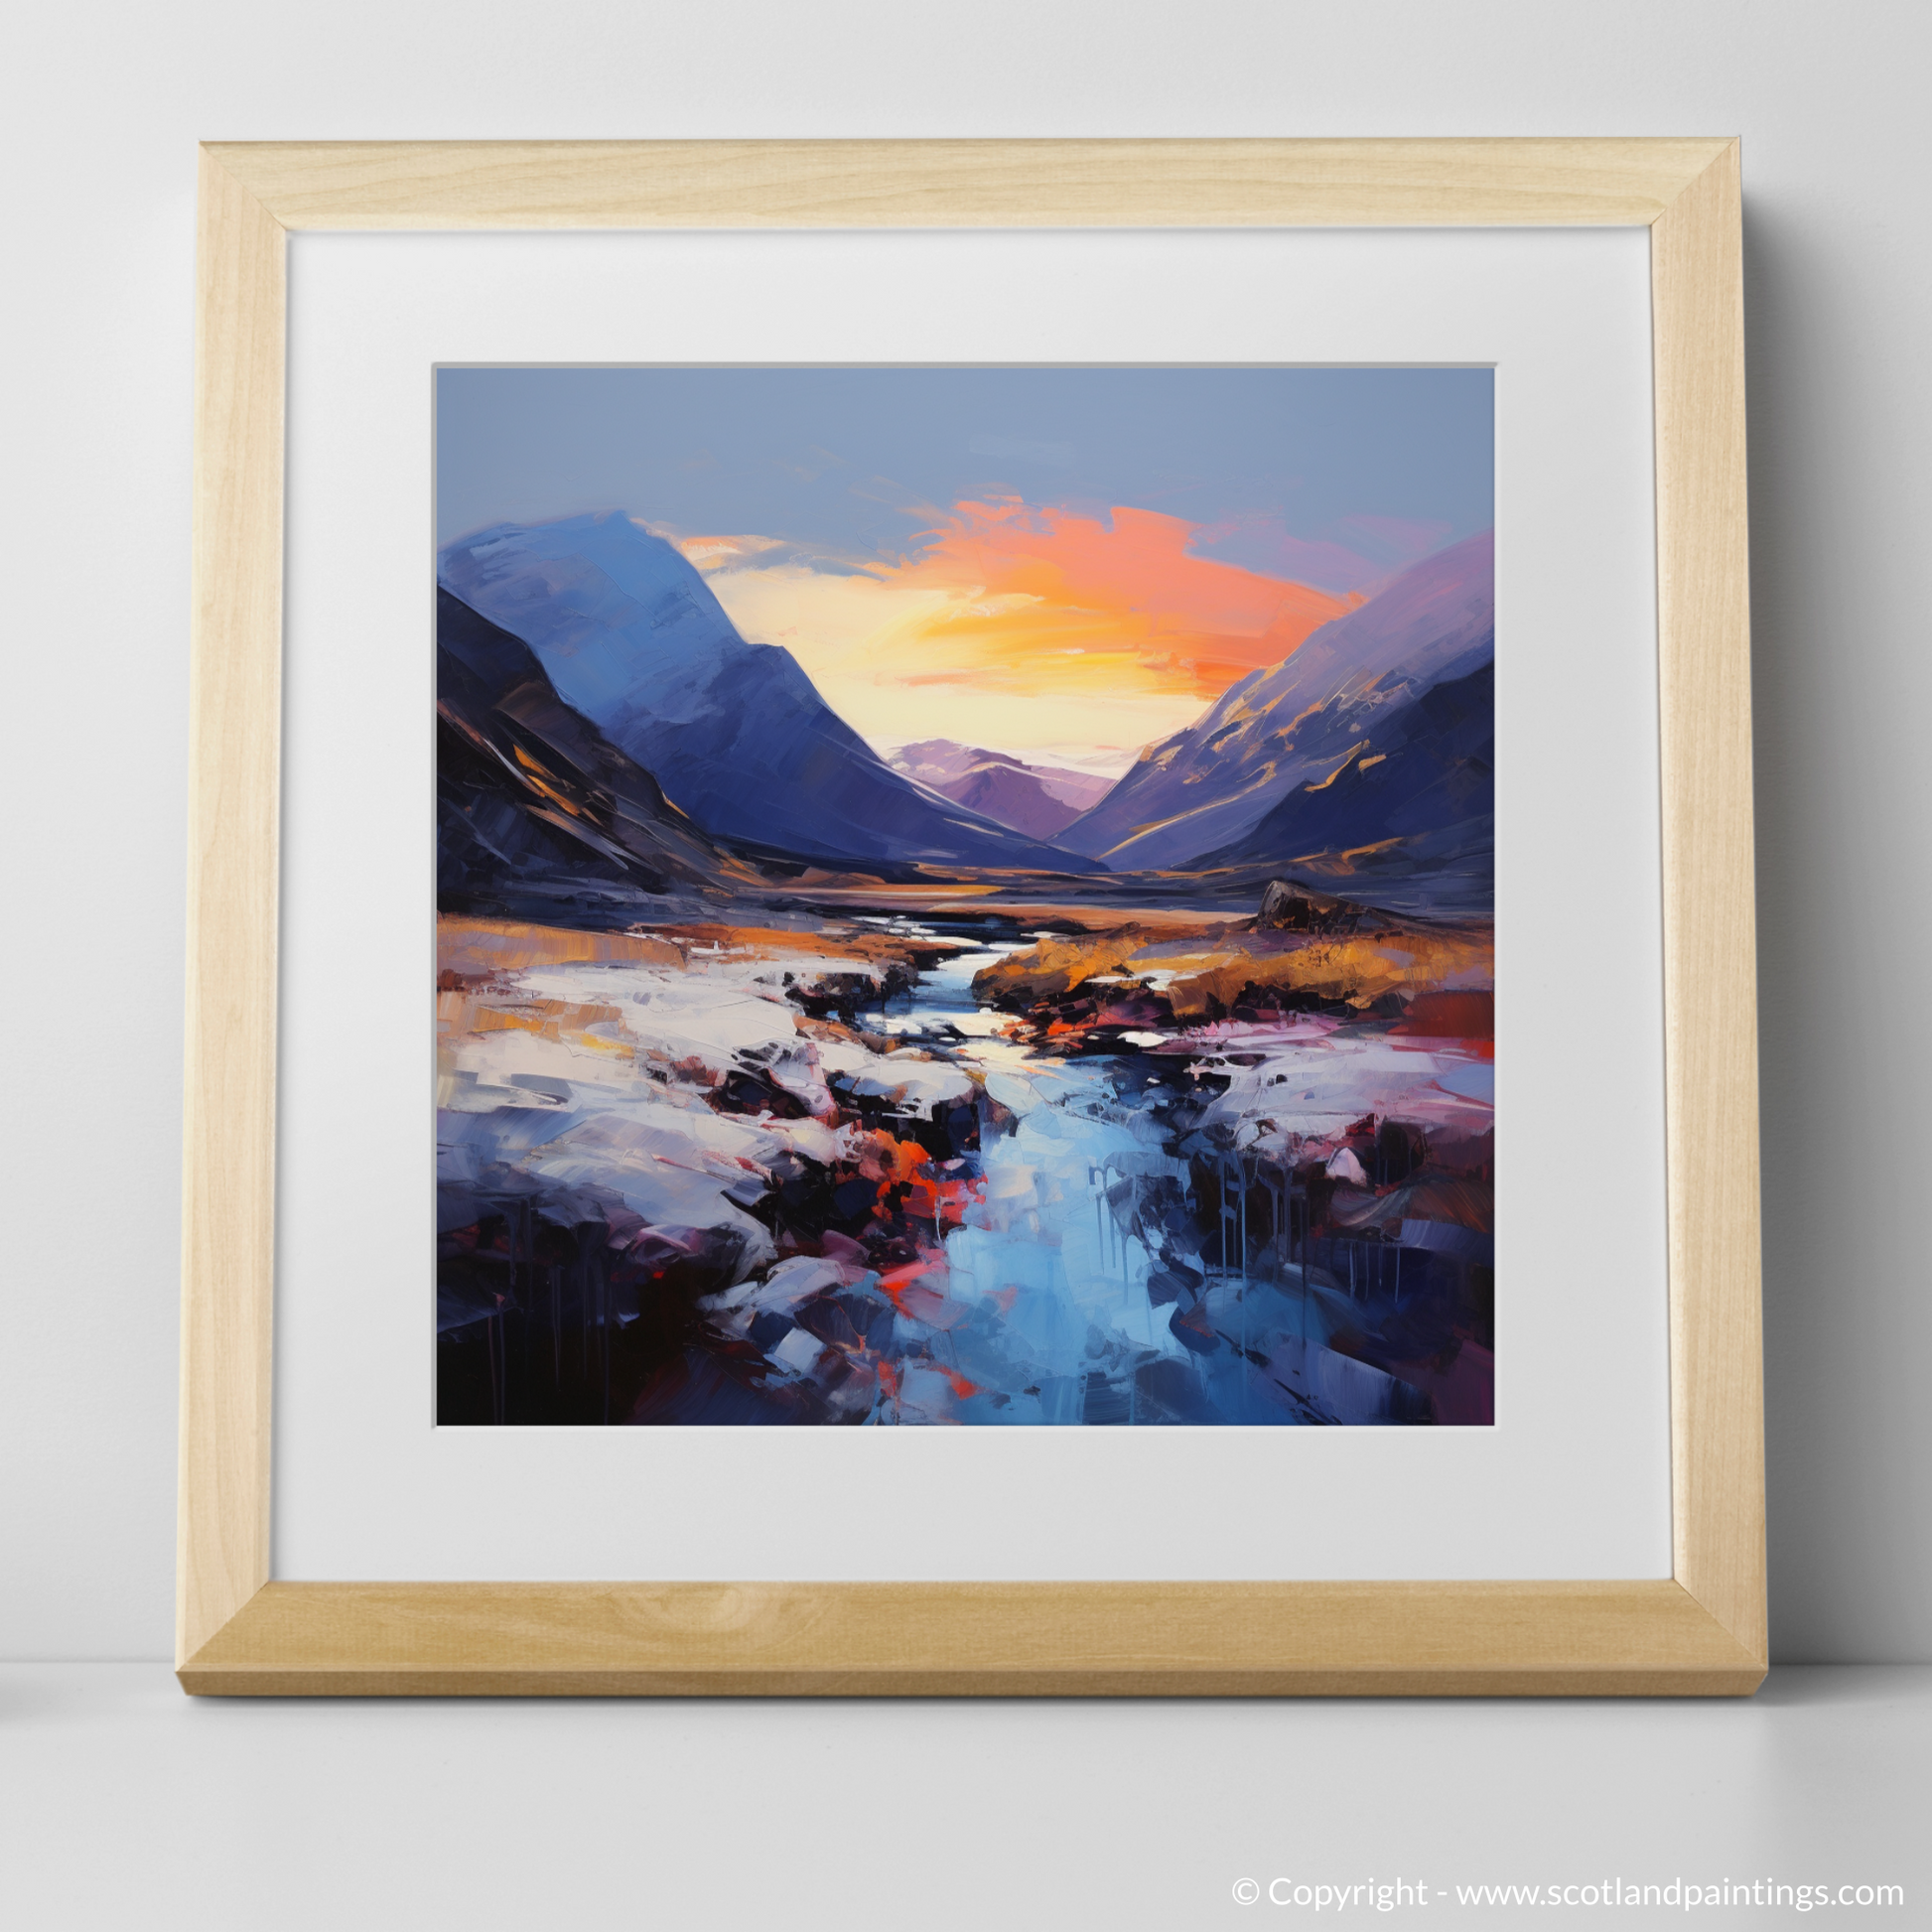 Art Print of Soft twilight on slopes in Glencoe with a natural frame